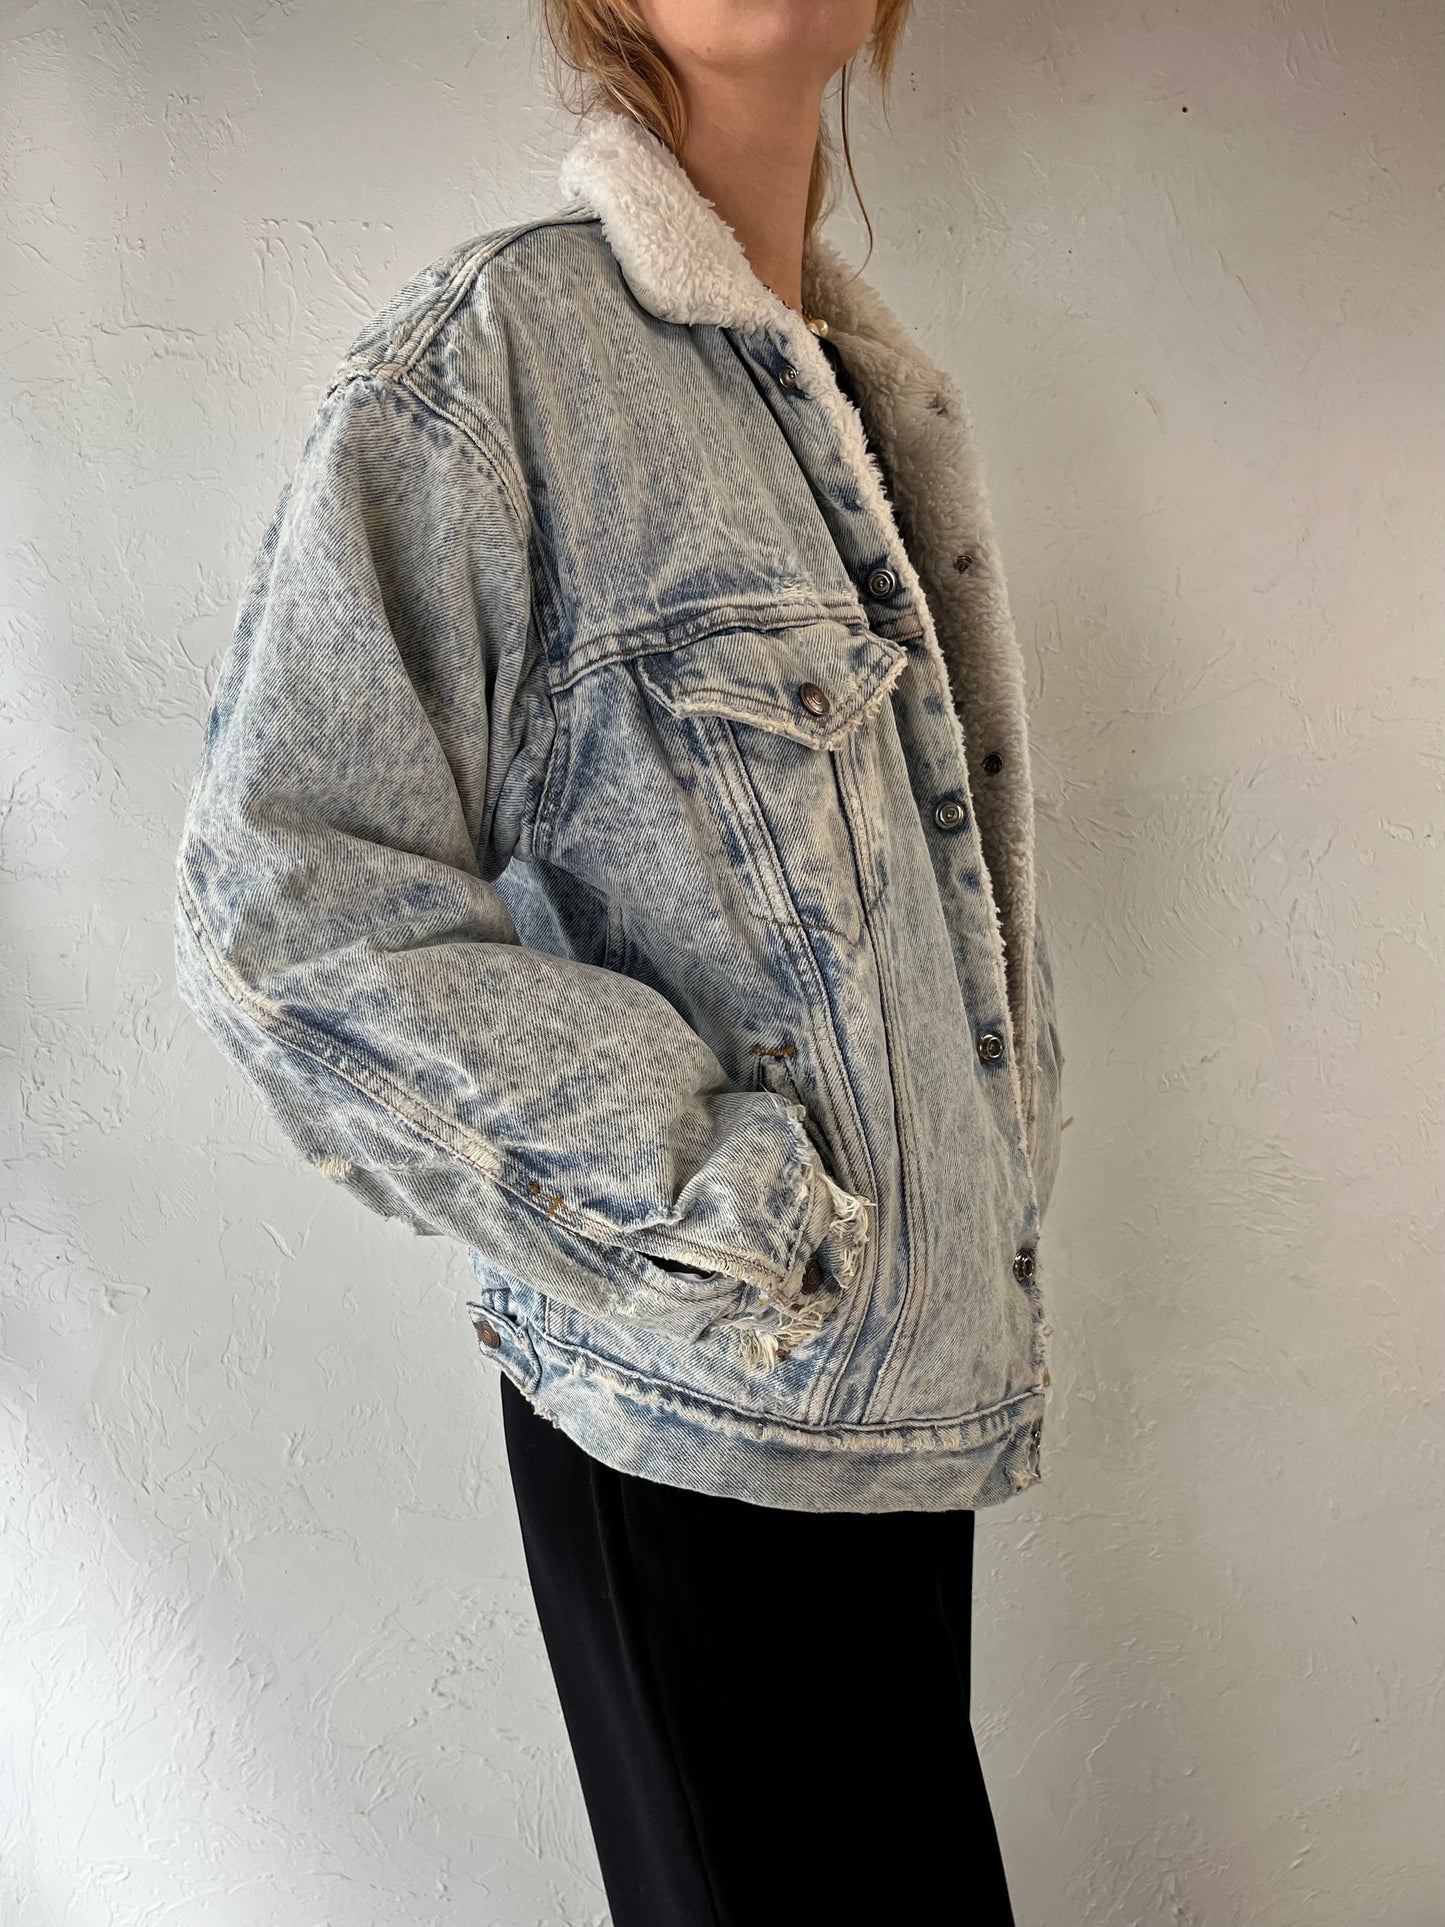 90s 'Levis' Thrashed Faux Shearling Lined Acid Wash Denim Jacket / Small